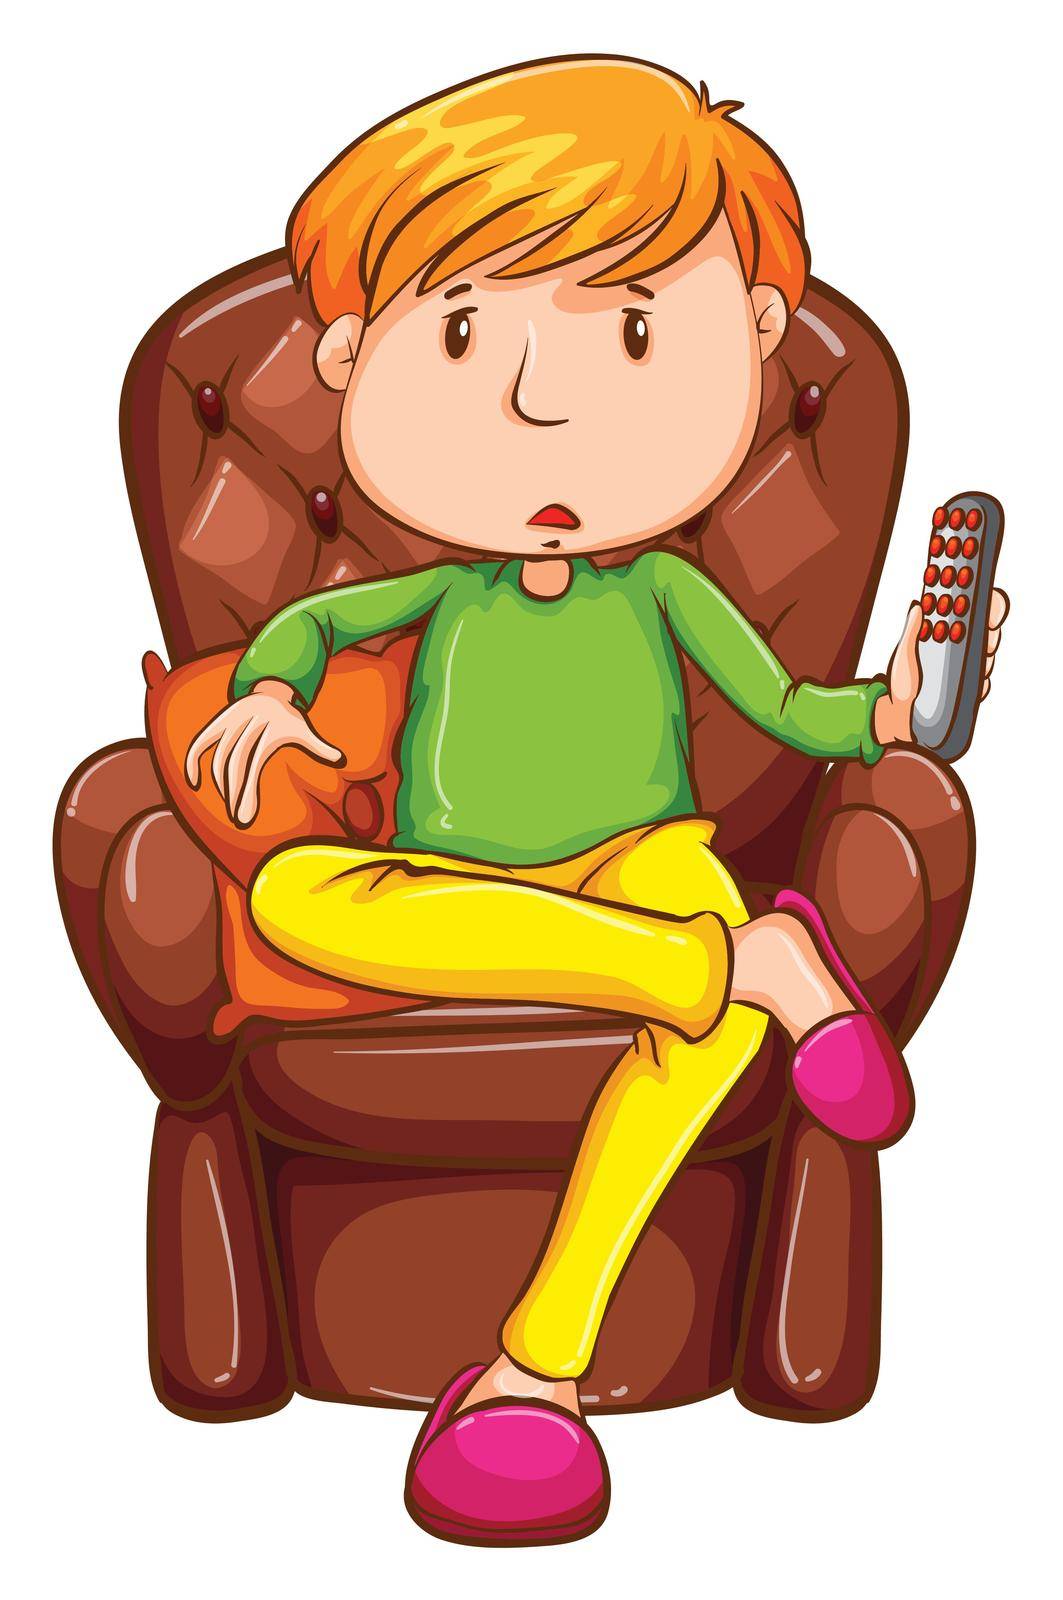 Illustration of a man sitting with a remote